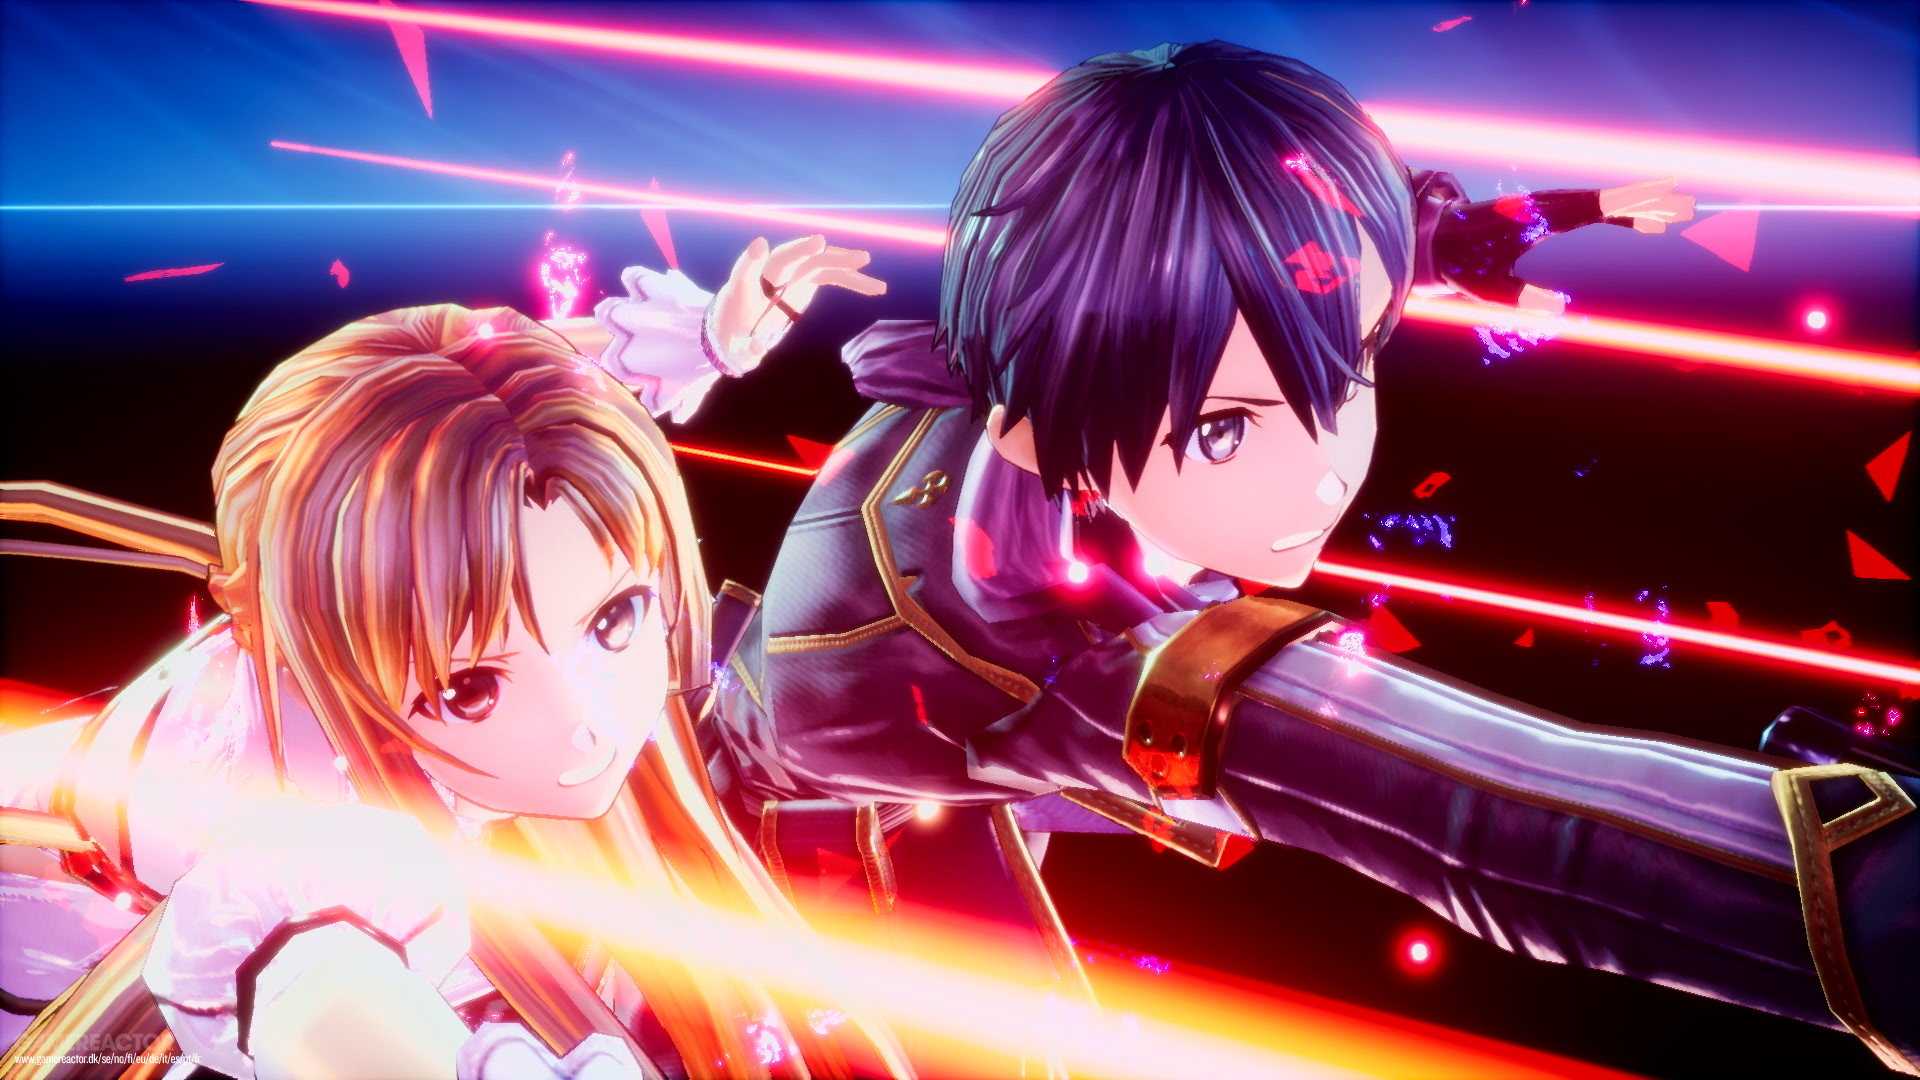 Sword Art Online presents its new title, Last Recollection